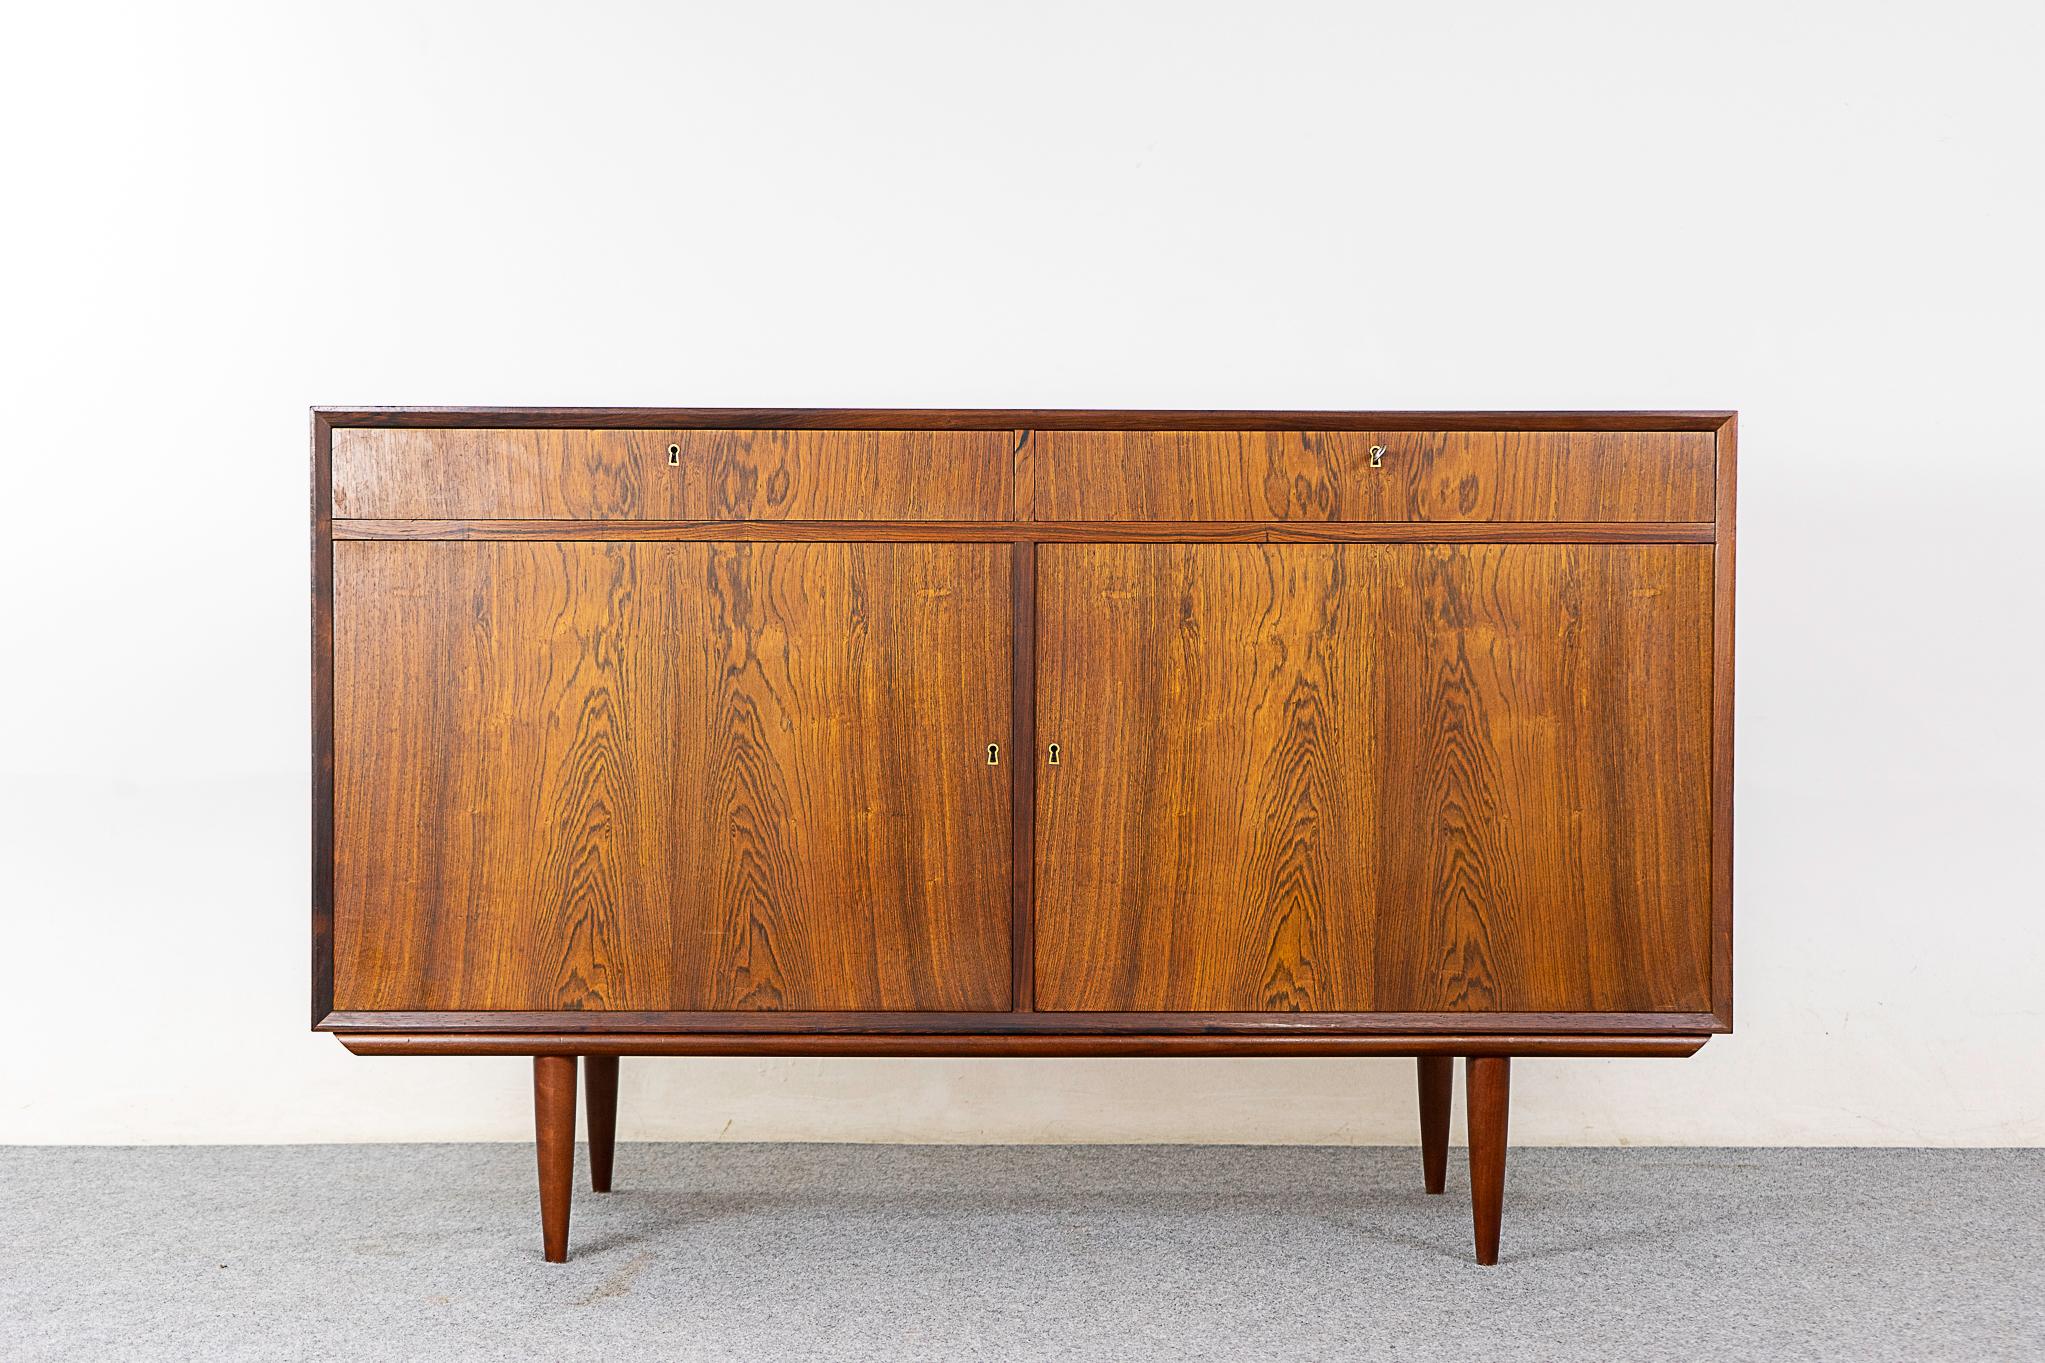 Rosewood mid-century sideboard, circa 1960's. Clean, simple design with exceptional book-matched veneer throughout. Locking doors and drawers, adjustable interior shelving and elegant tapering legs! 

Unrestored item with option to purchase in